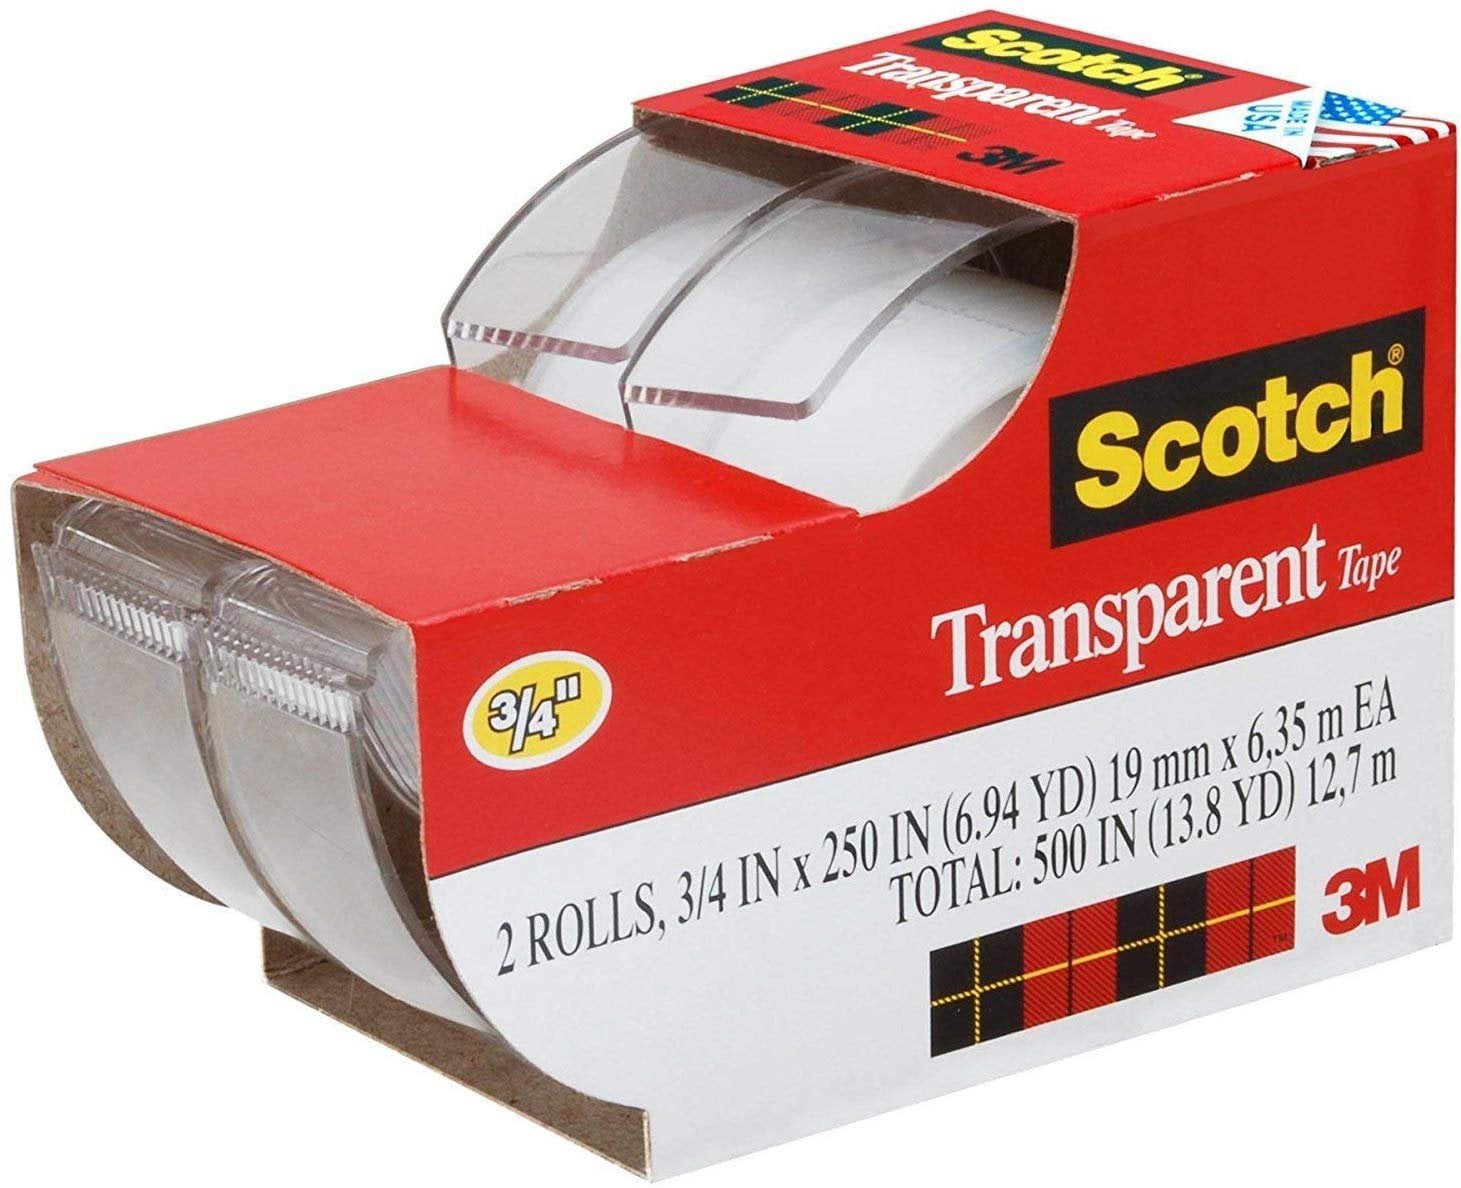 Scotch® Crystal Clear Tape, 19 mm x 7.5 m, 2 Rolls on Handheld Dispenser +  1 FREE/Pack